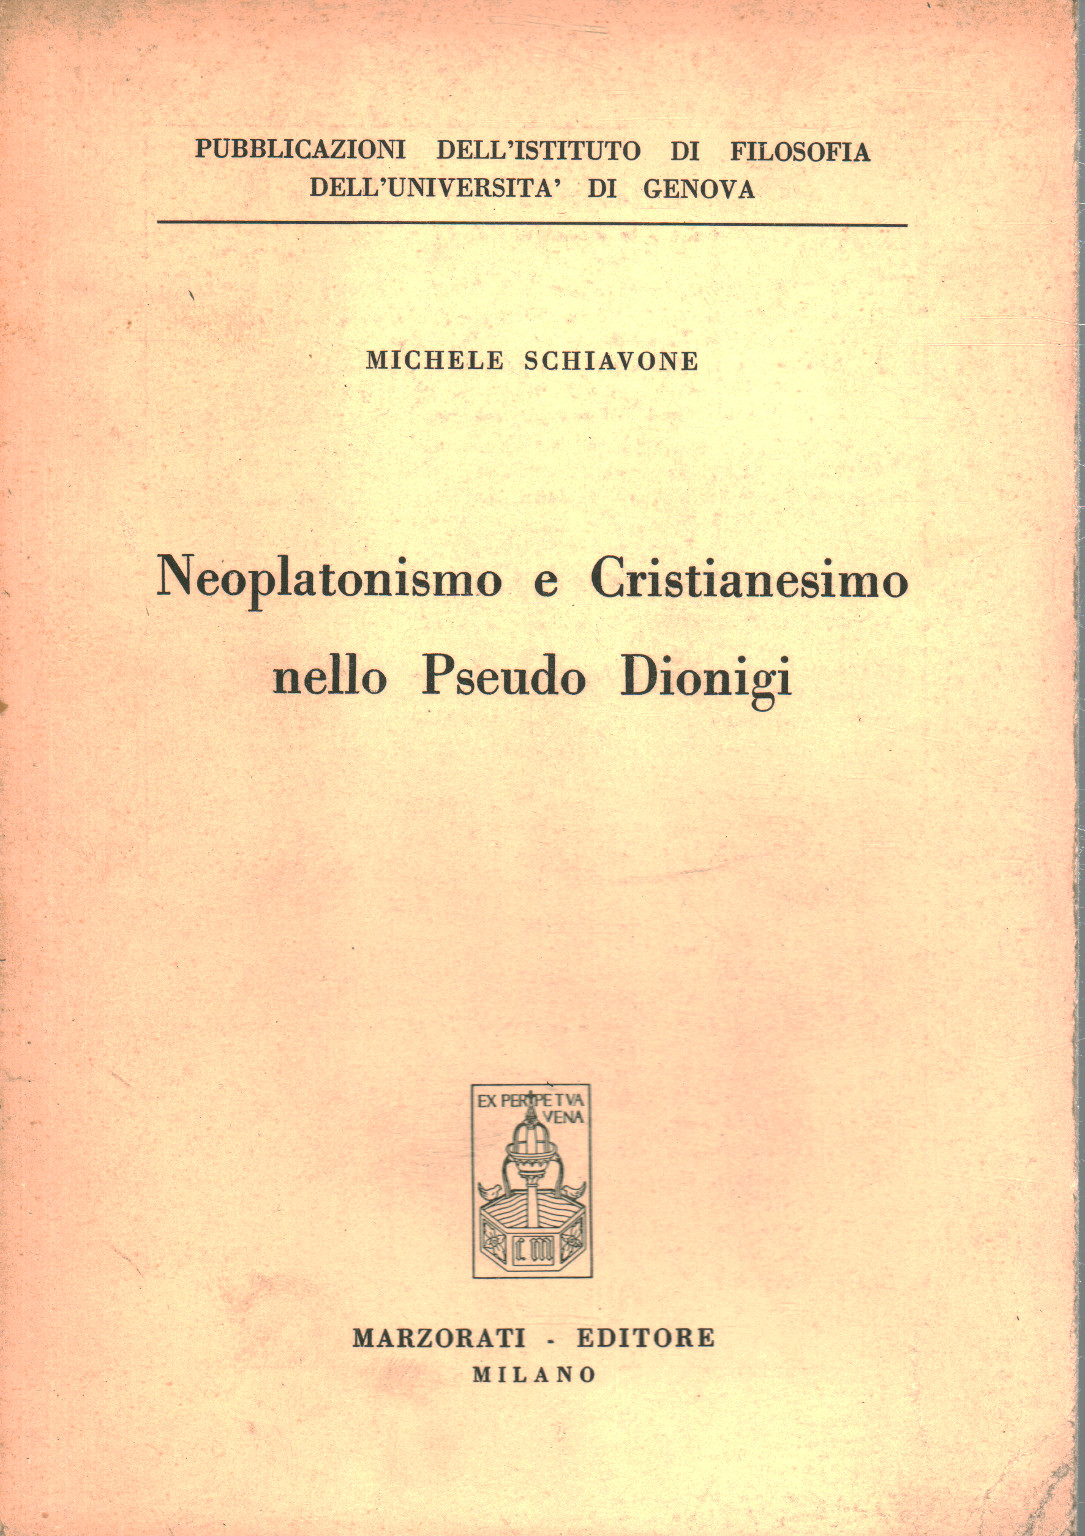 Neoplatonism and Christianity in the Pseudo-Dionysius, s.a.